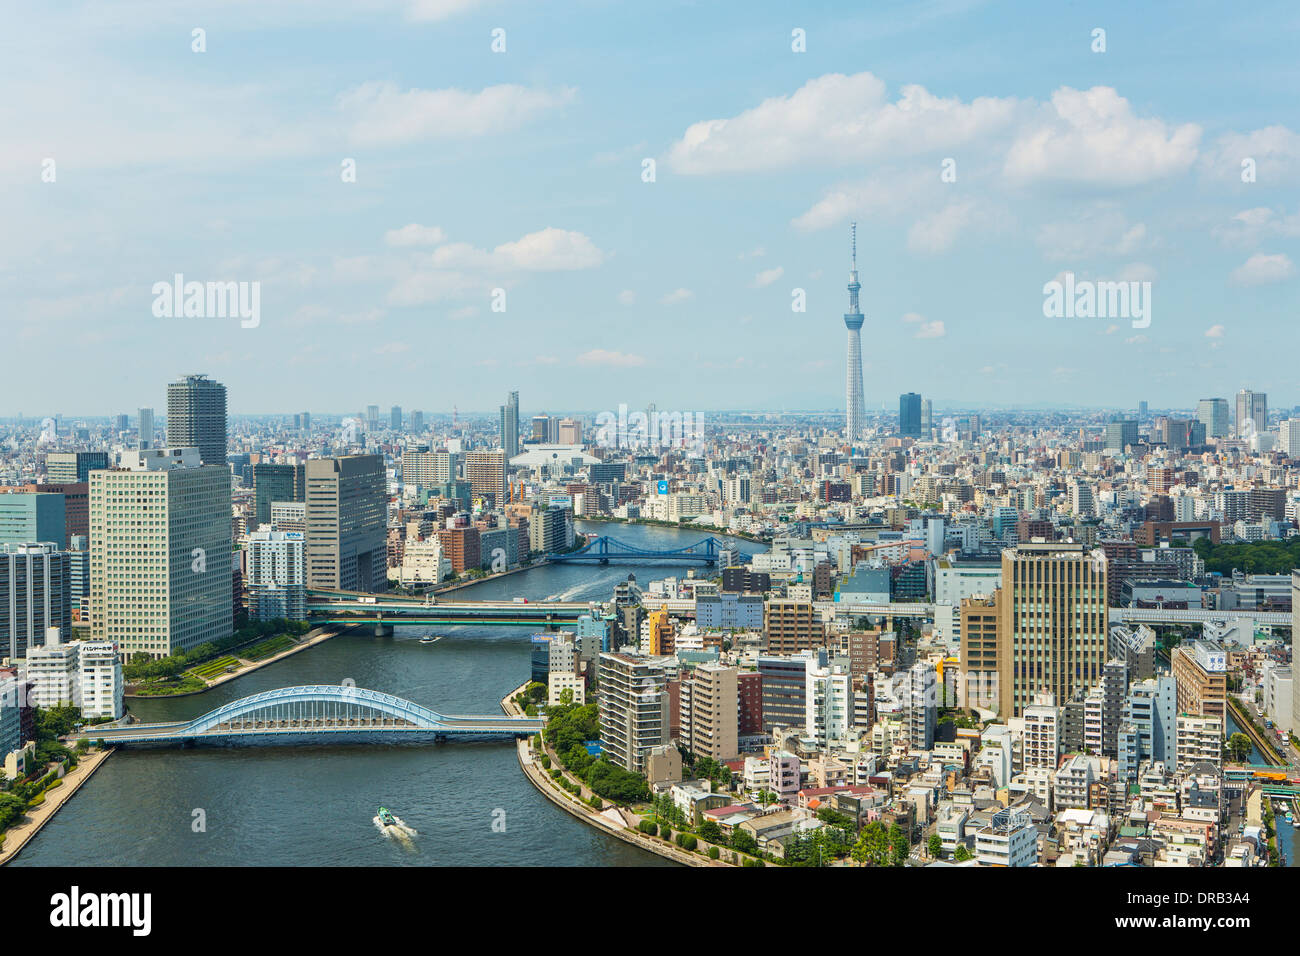 Sumida river and Sky Tree Tower in Tokyo Stock Photo